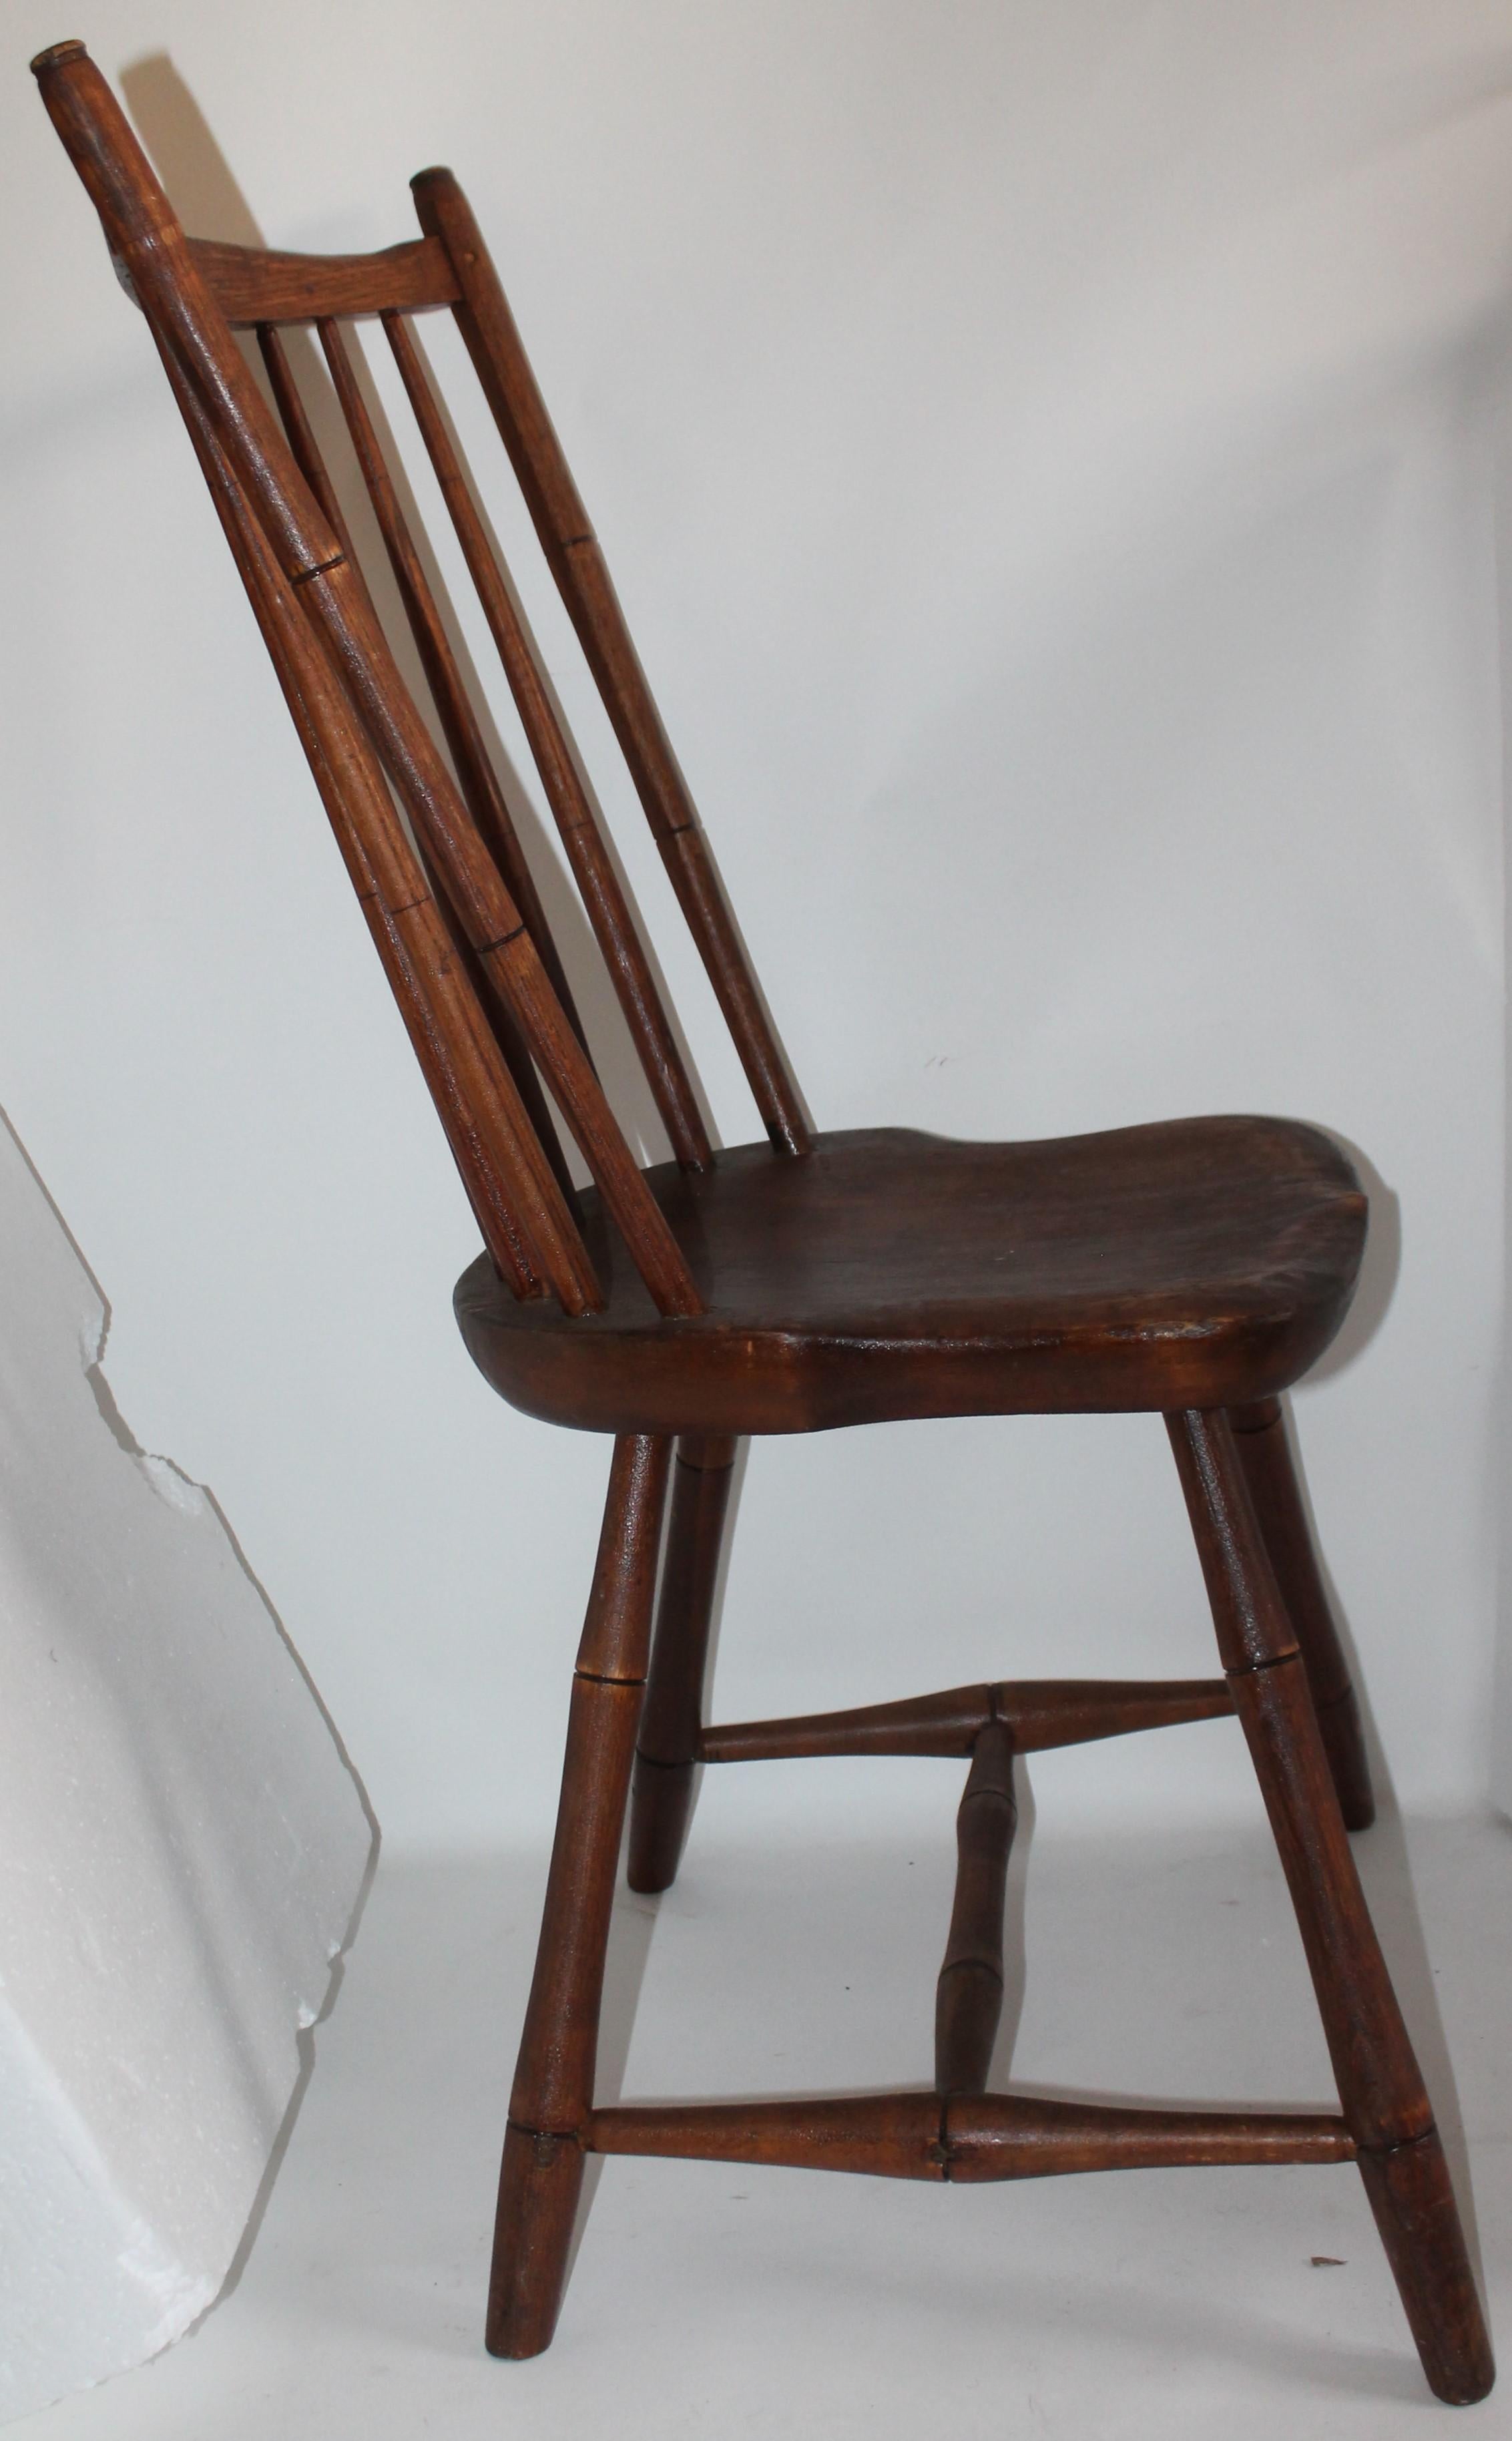 This 19th century rod back bird cage Windsor chair from New England.The chair has a wonderful aged patina.
Measures: (18 wide x 17 deep x 37 high).